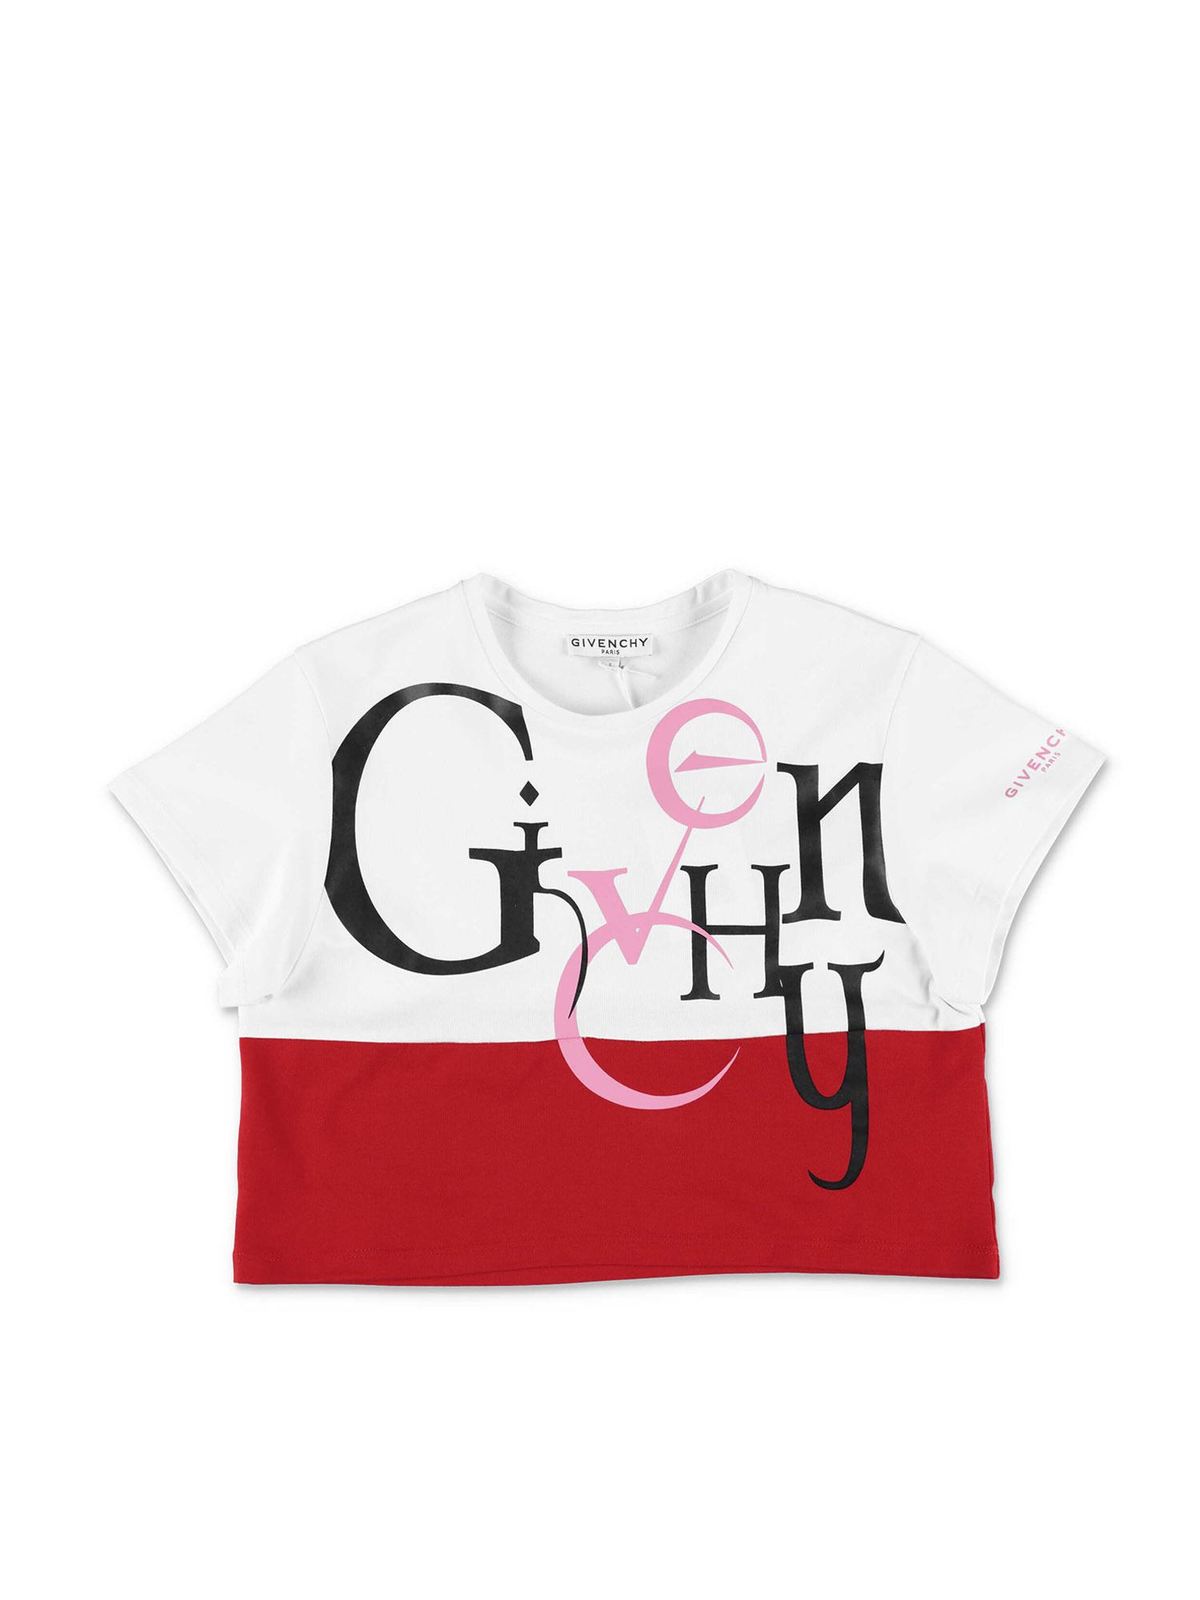 GIVENCHY PRINTED T-SHIRT IN WHITE AND RED